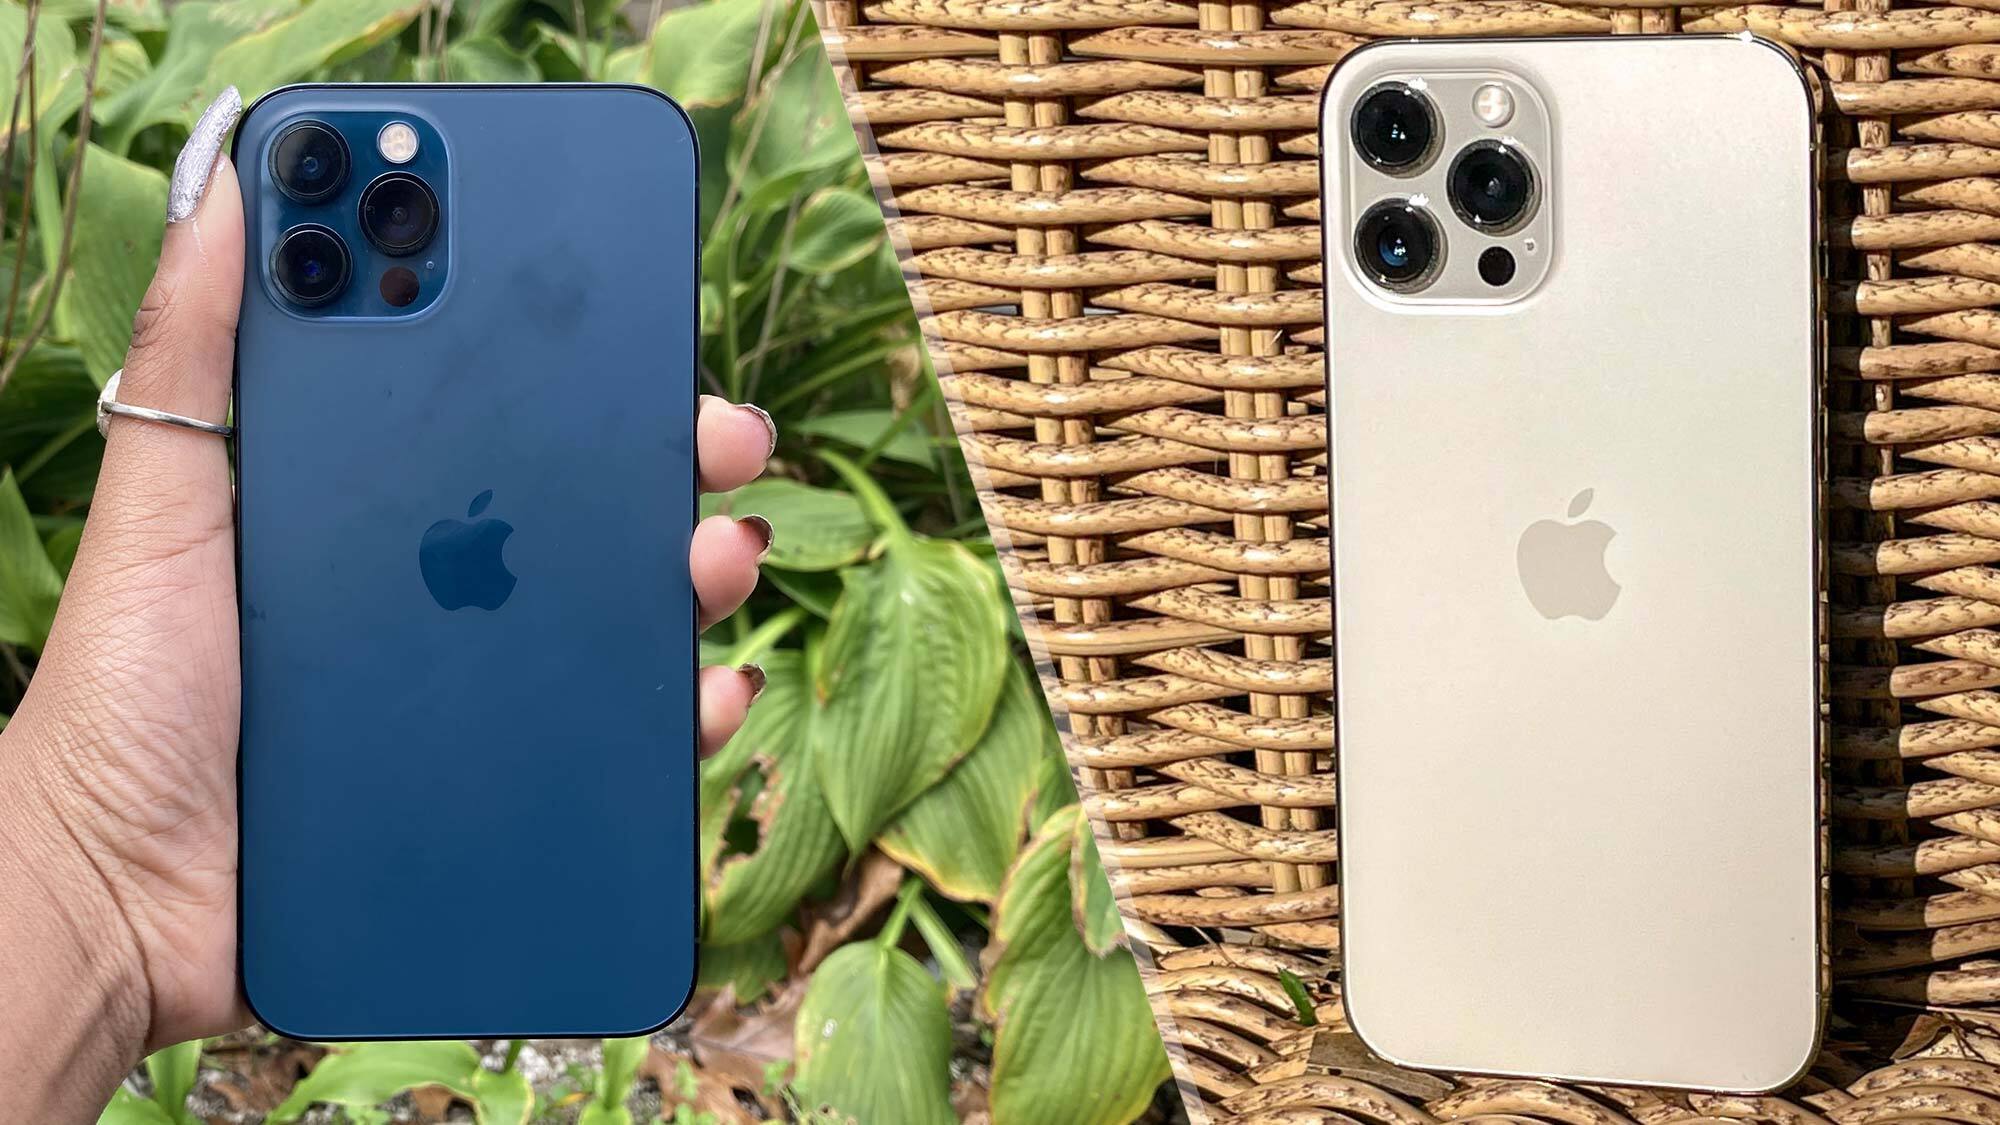 iPhone 12 Pro vs. iPhone 12 Pro Max: Which should you buy